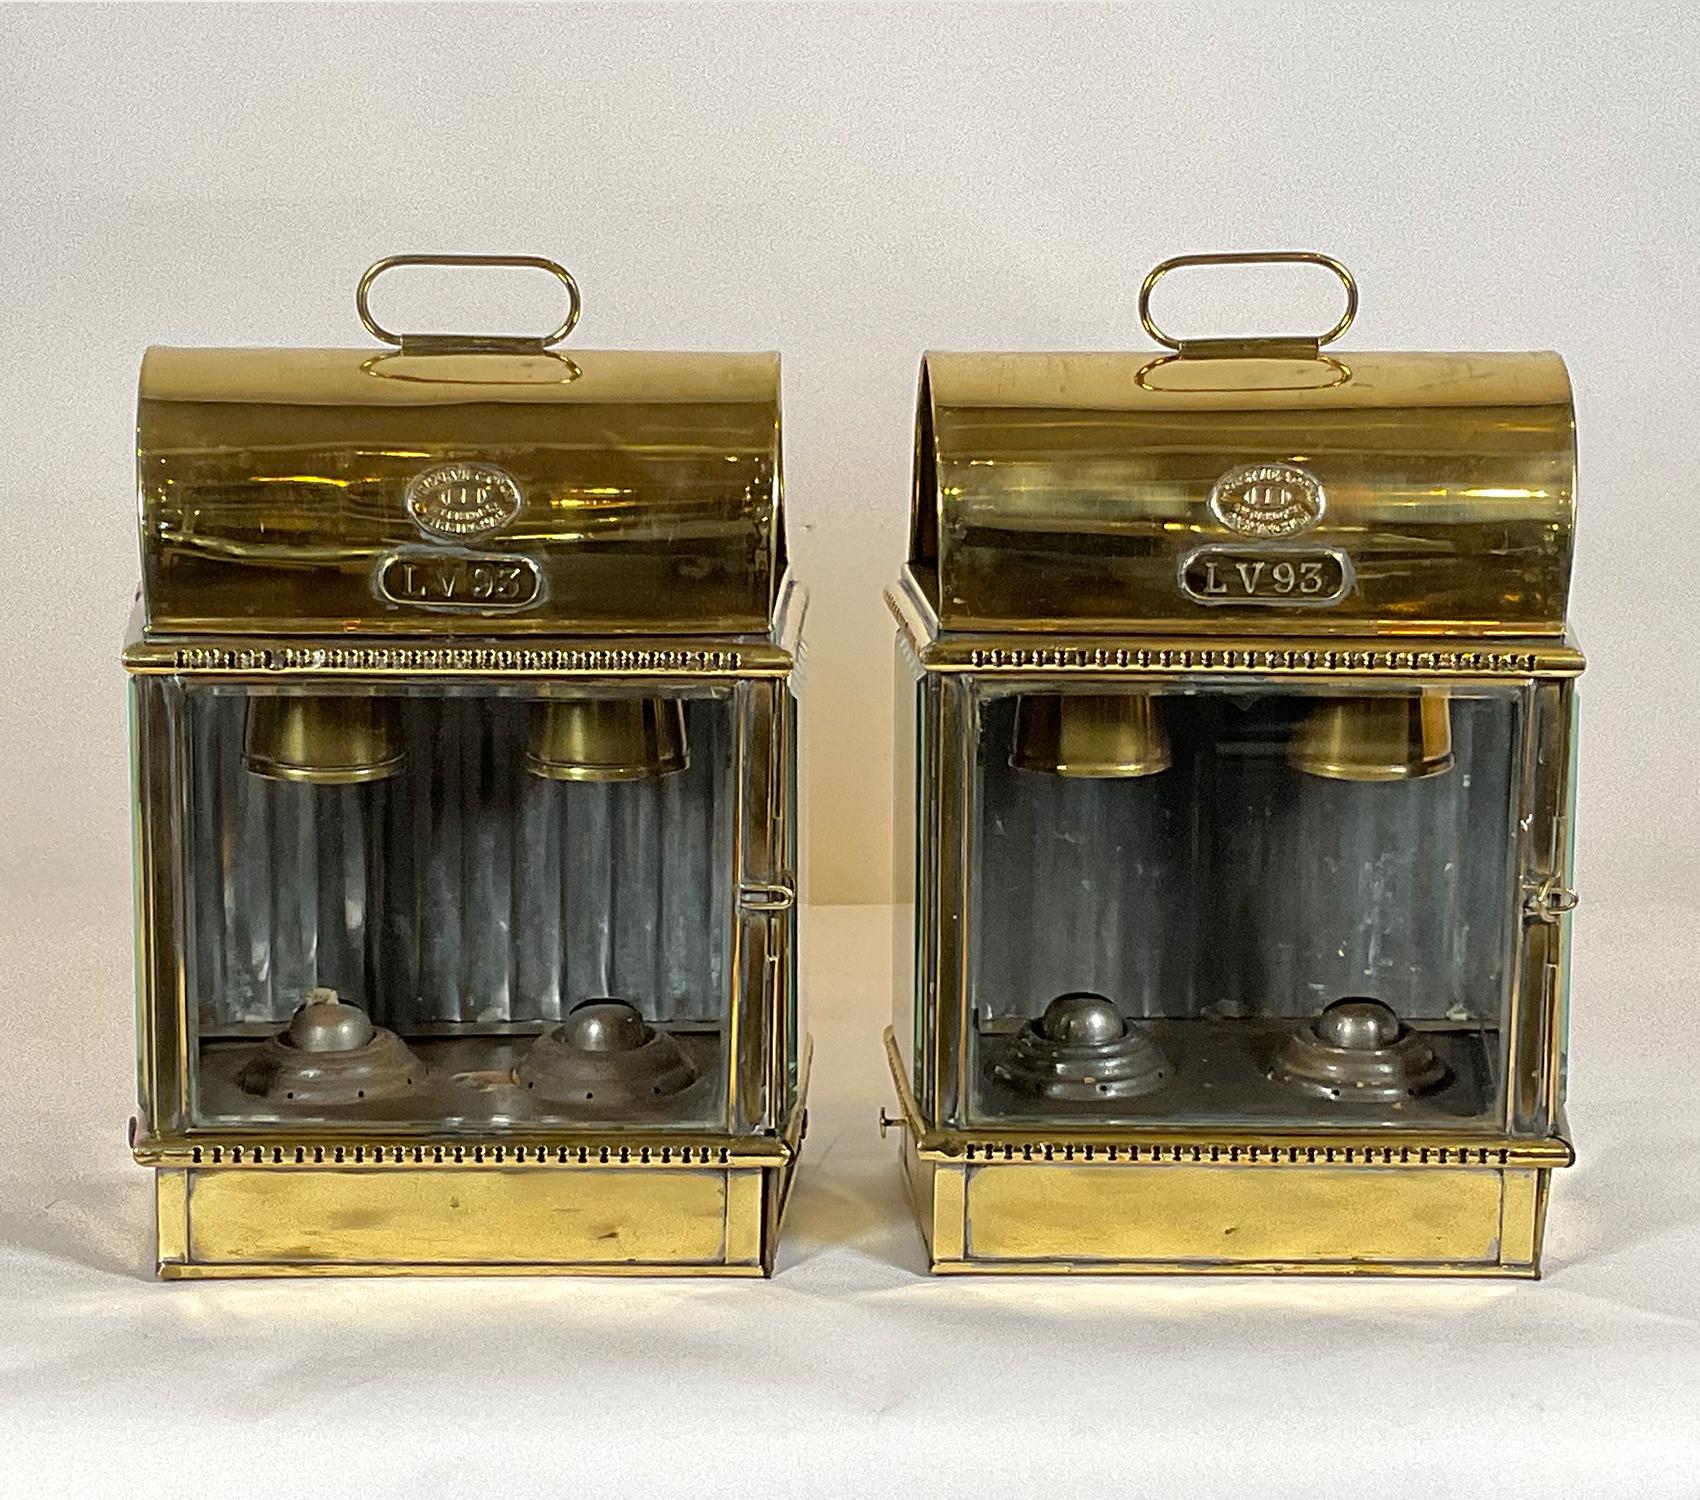 Fabulous pair of British ship’s lanterns from the British light vessel “LV-93”. The original vessel was built by Philip and Son of Dartmouth in 1938. The vessel was in the North Sea unit 2004. The lanterns are solid brass with a lacquer finish. With